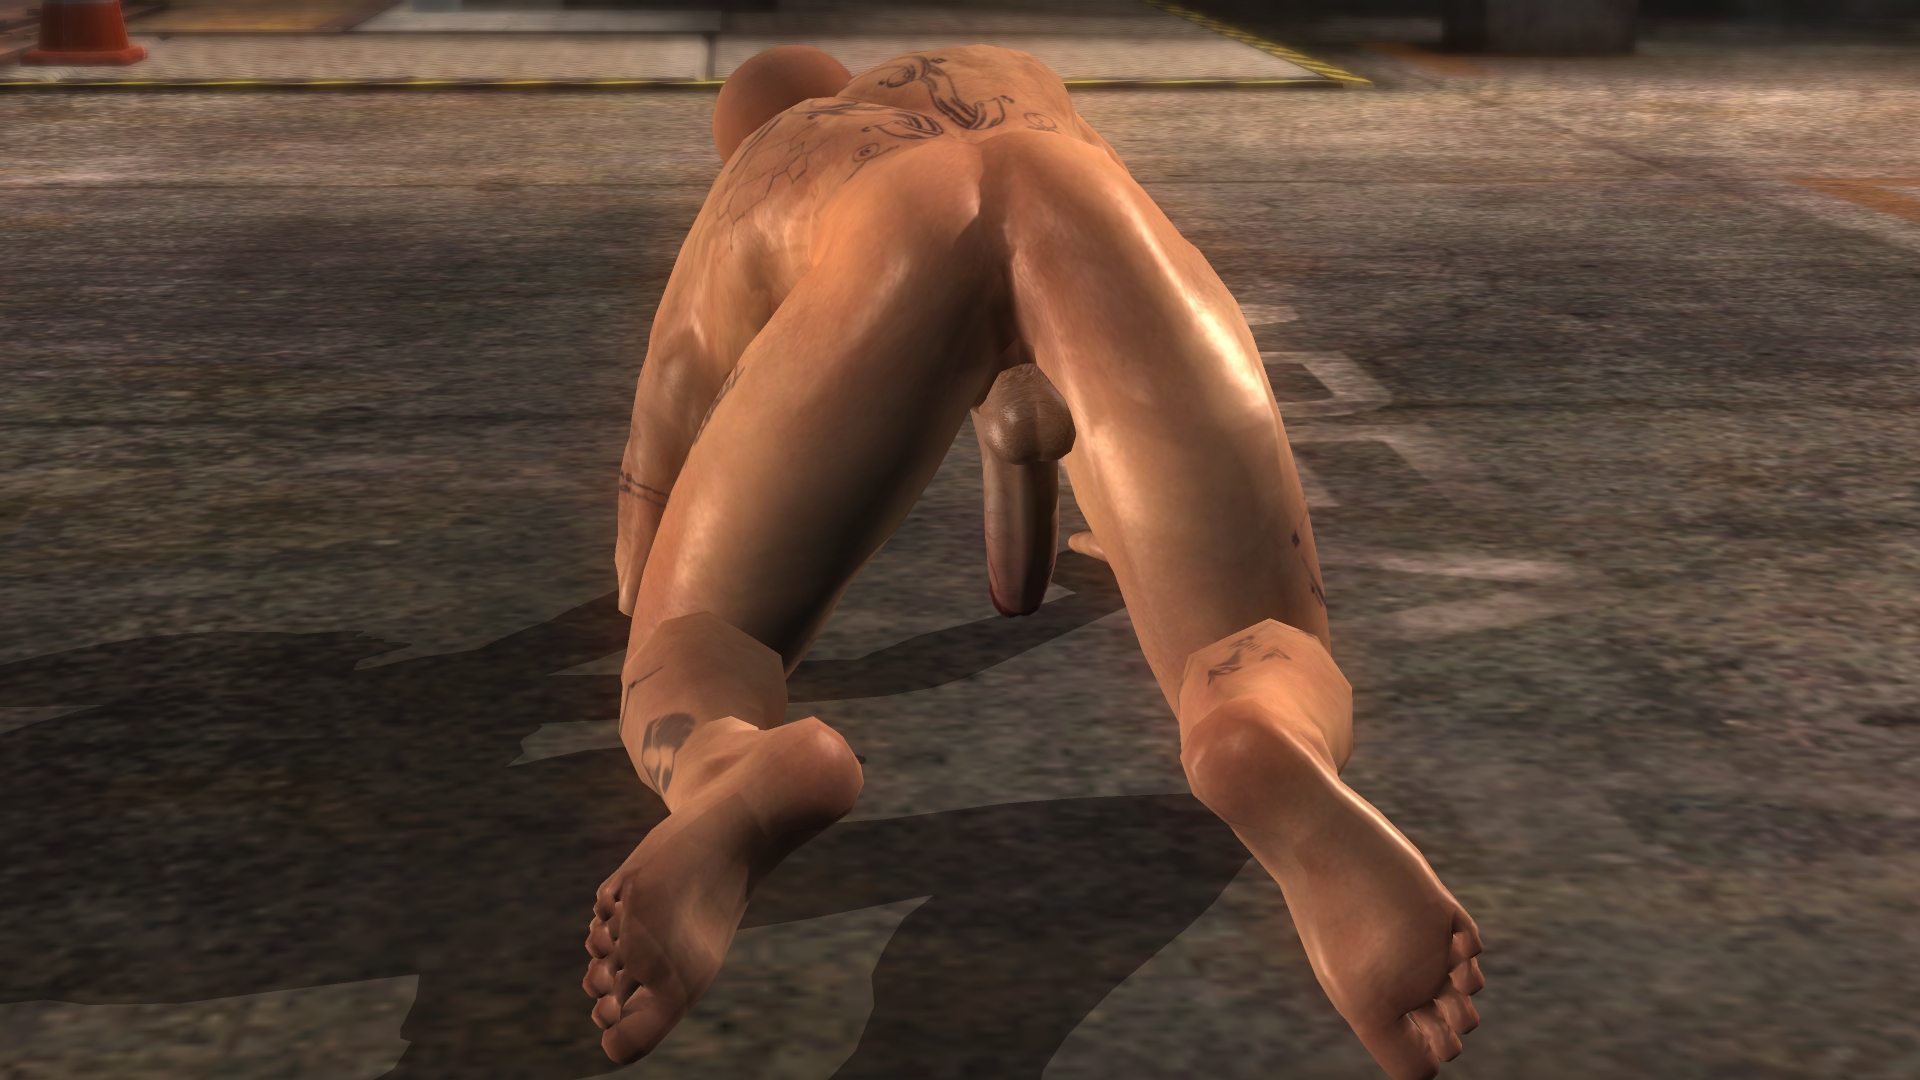 [doa5lr] Nude Males Mods [erect Version] Page 2 Dead Or Alive 5